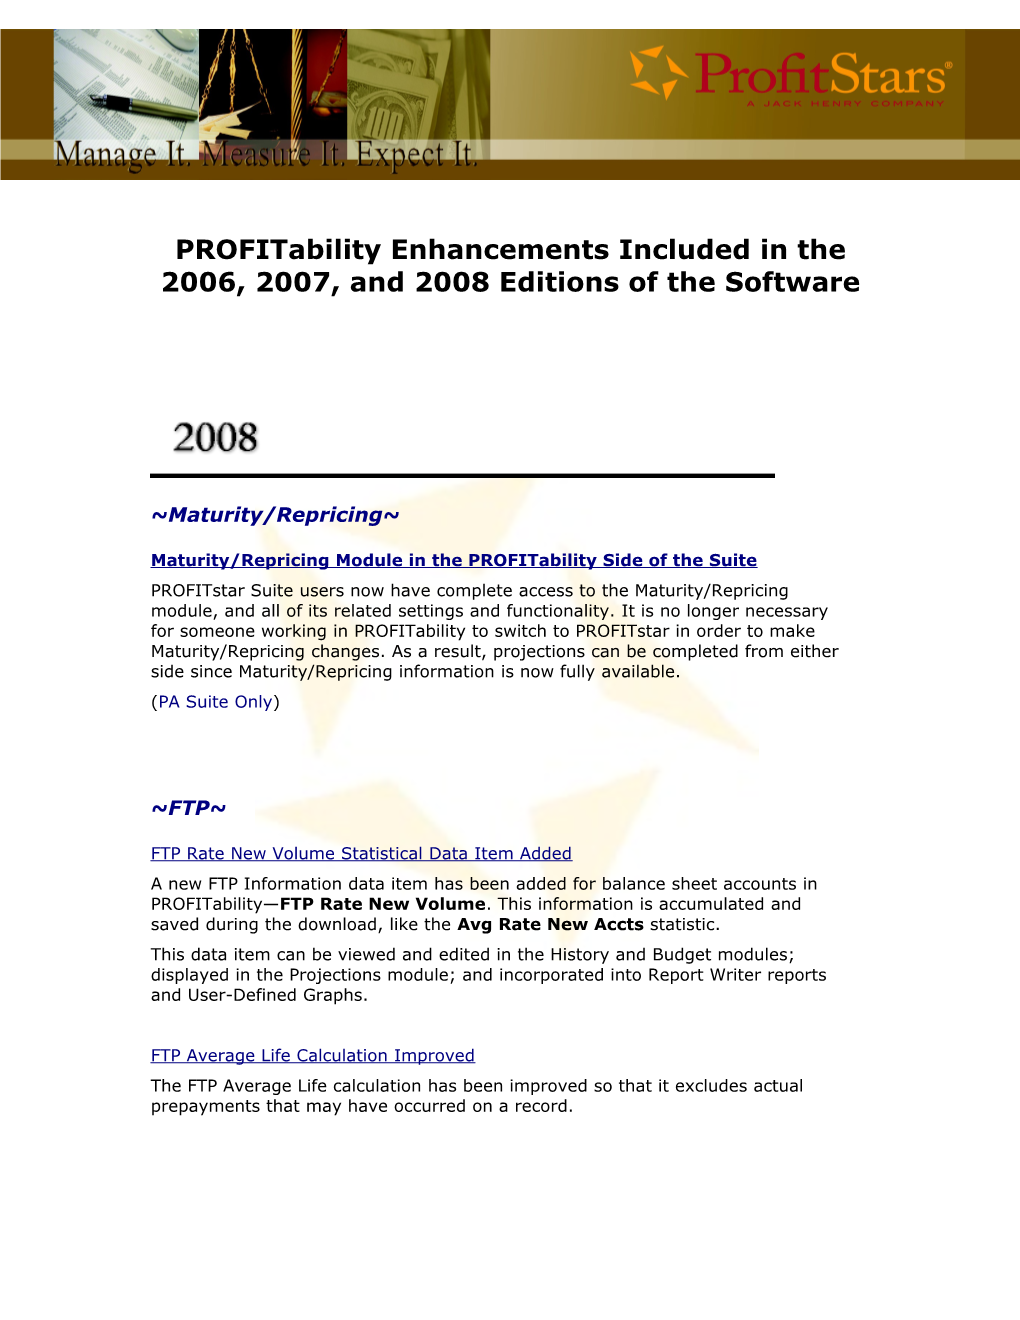 Profitability Enhancements Included in the 2006, 2007, and 2008 Editions of the Software